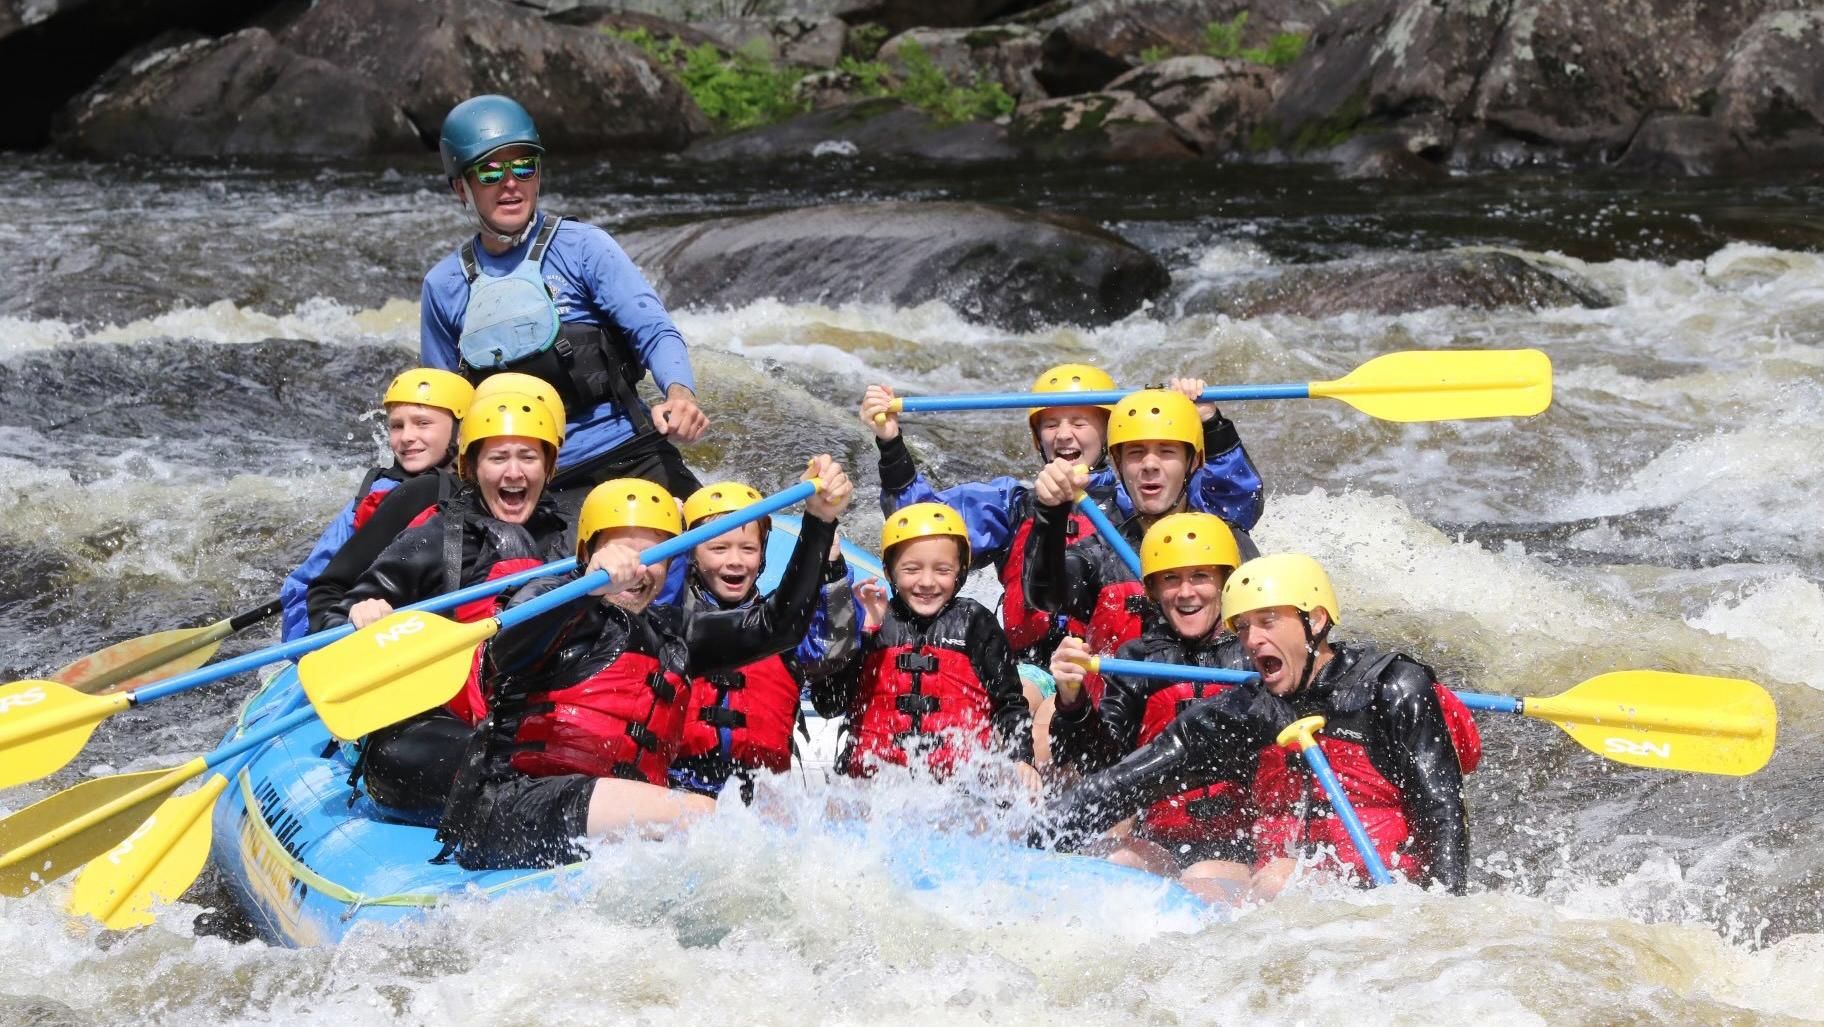 Jamie Haney, General Counsel - North America and Global Specialty Care, (right, second from bottom) navigates white water rapids in a raft with paddles along with nine family members and a guide.